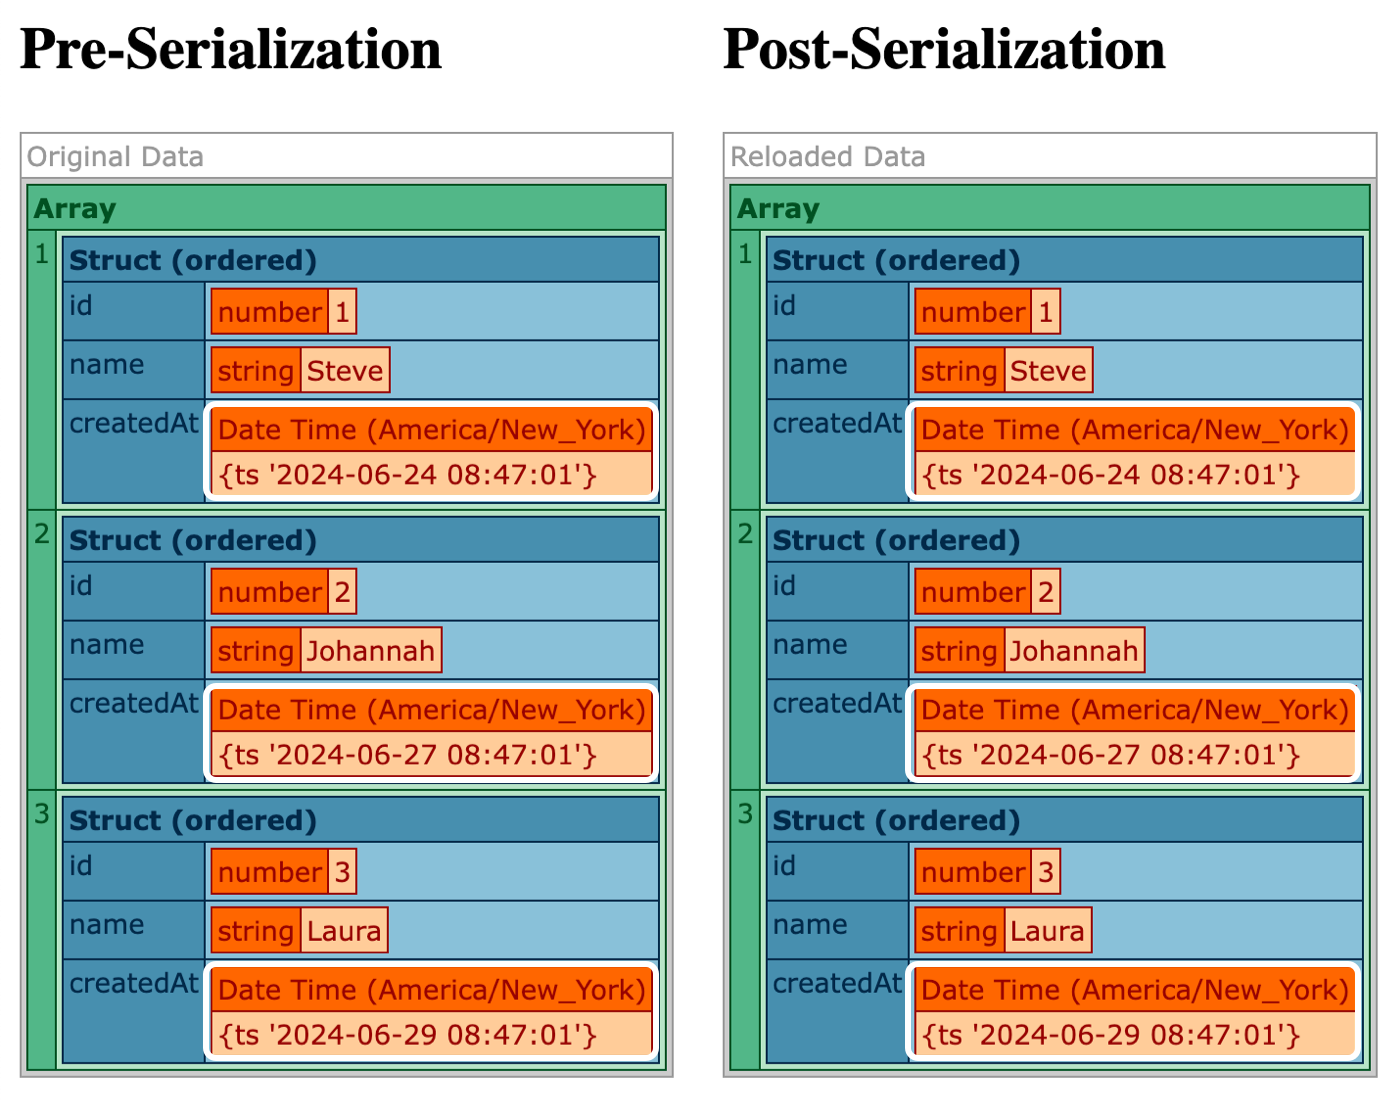 Two user collections, one before serialization and one after deserialization, showing the exact same data in ColdFusion.